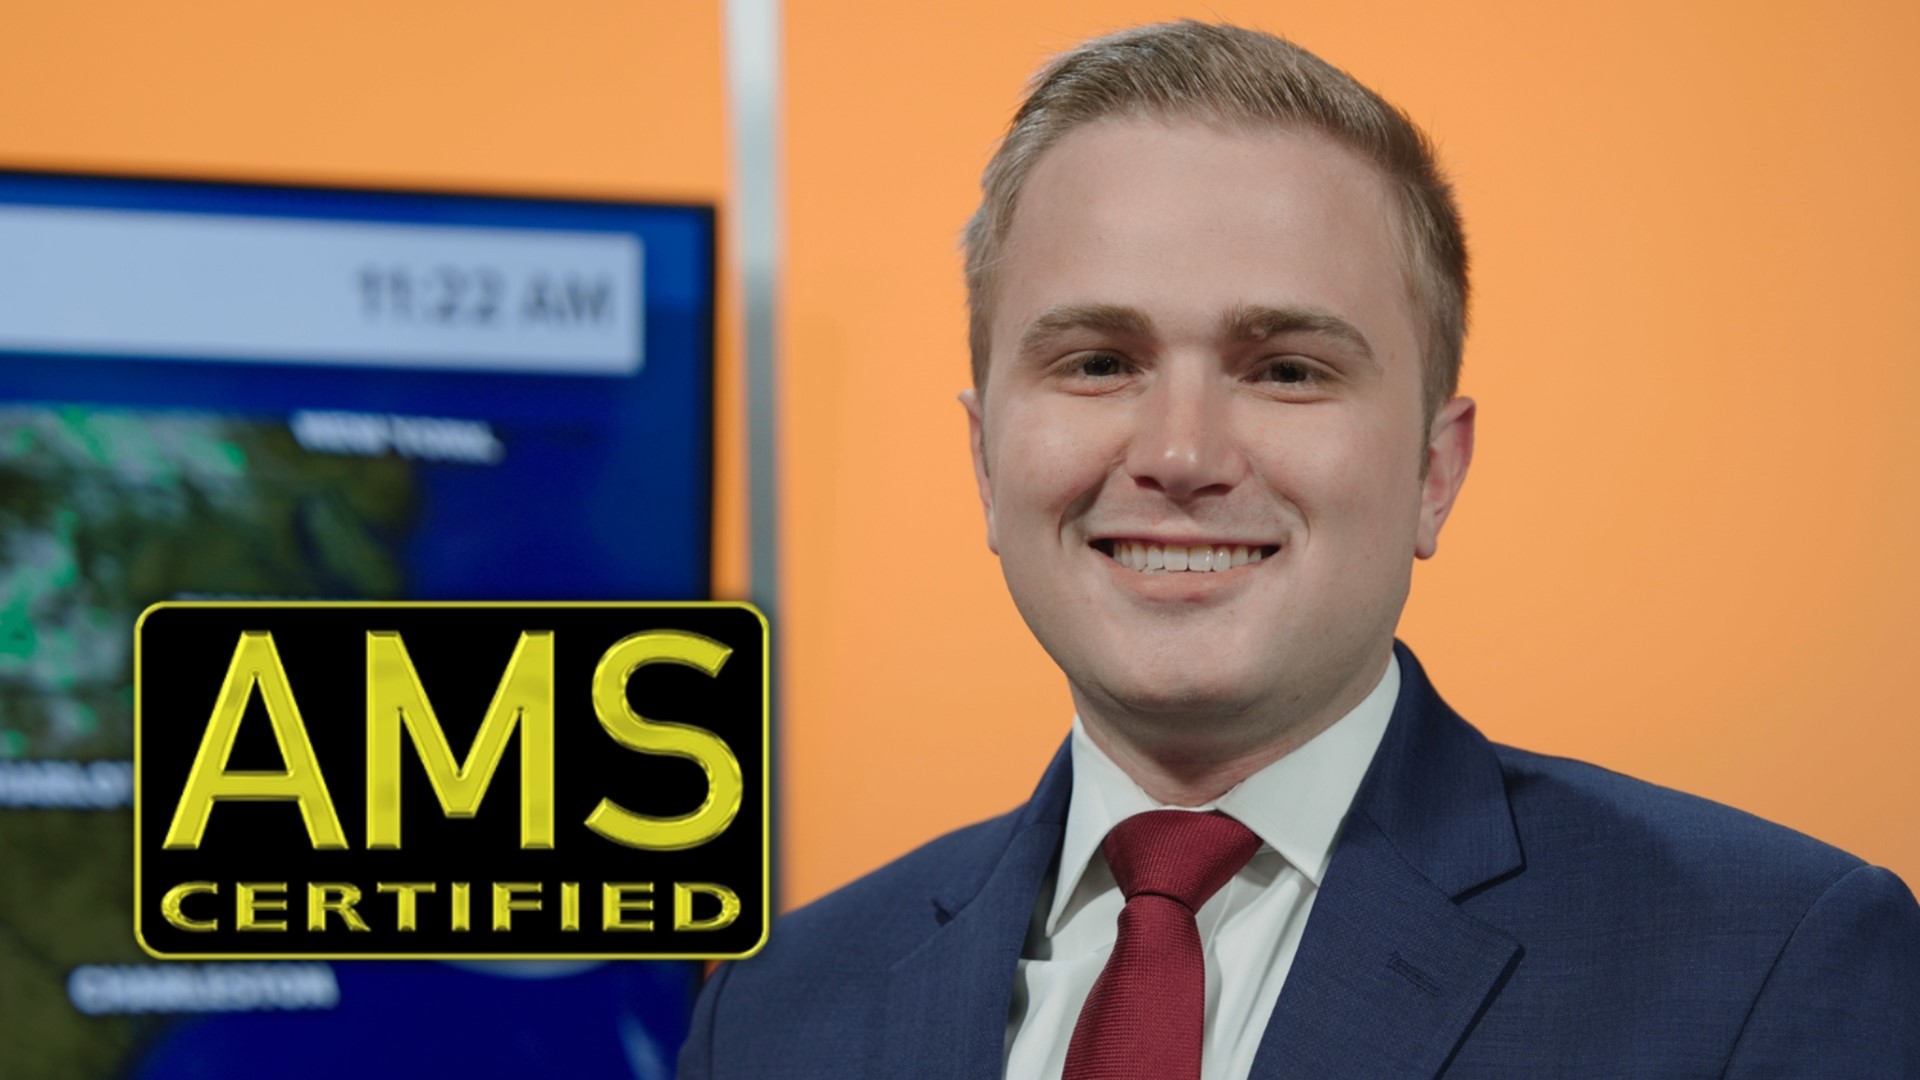 Alex Forbes earned the Certified Broadcast Meteorologist designation from the American Meteorological Society.